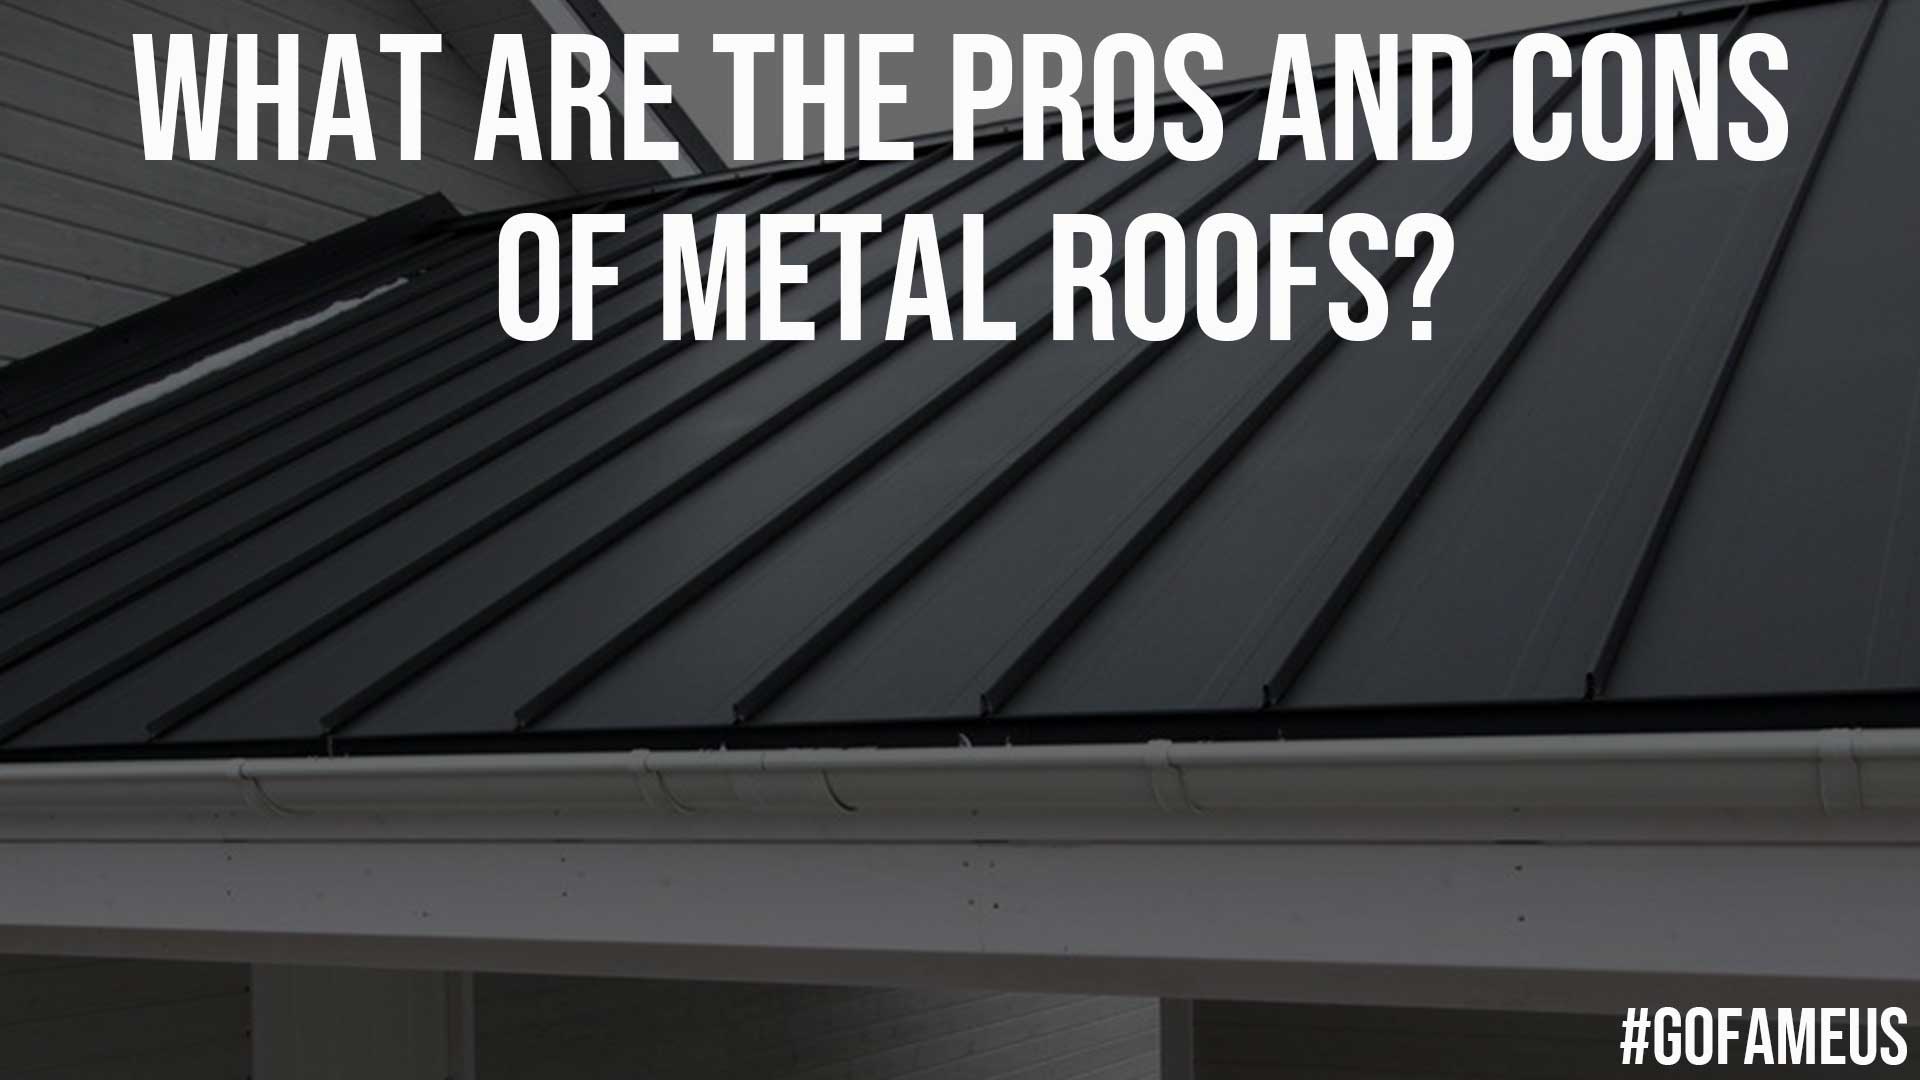 What Are the Pros and Cons of Metal Roofs